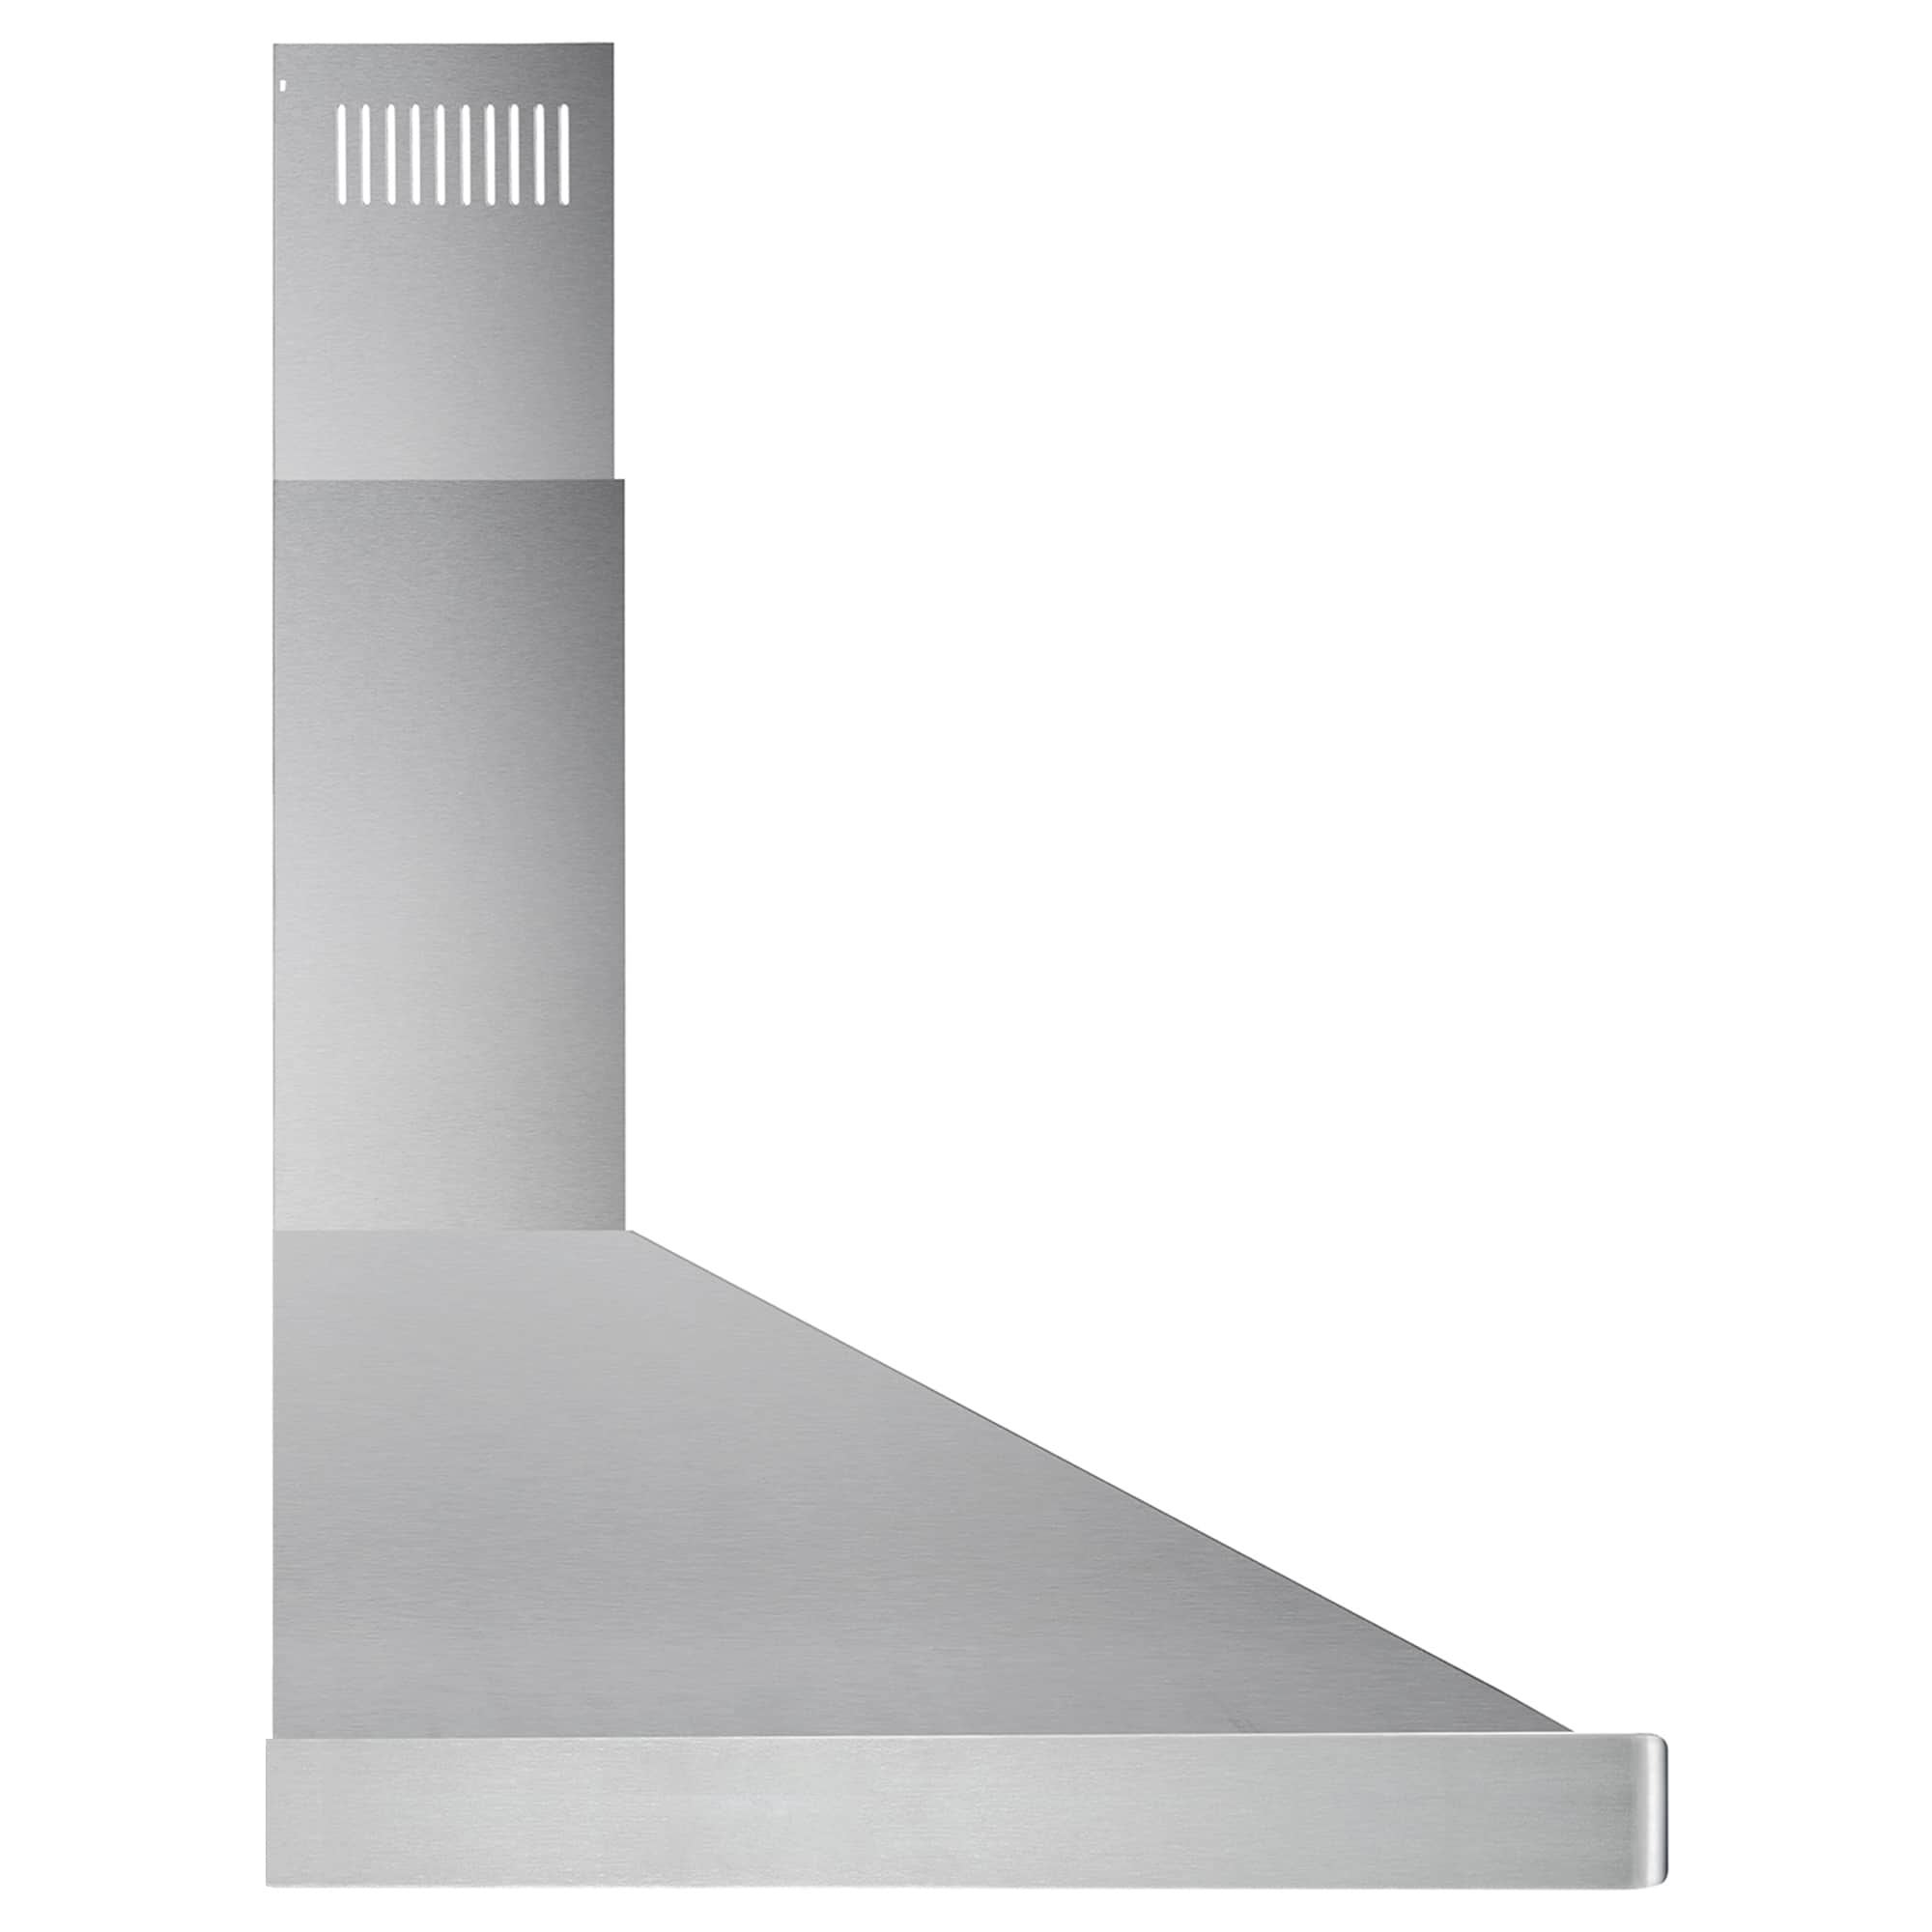 Cosmo 30-Inch Range Hood 760 CFM Ducted Wall Mount - Stainless Steel